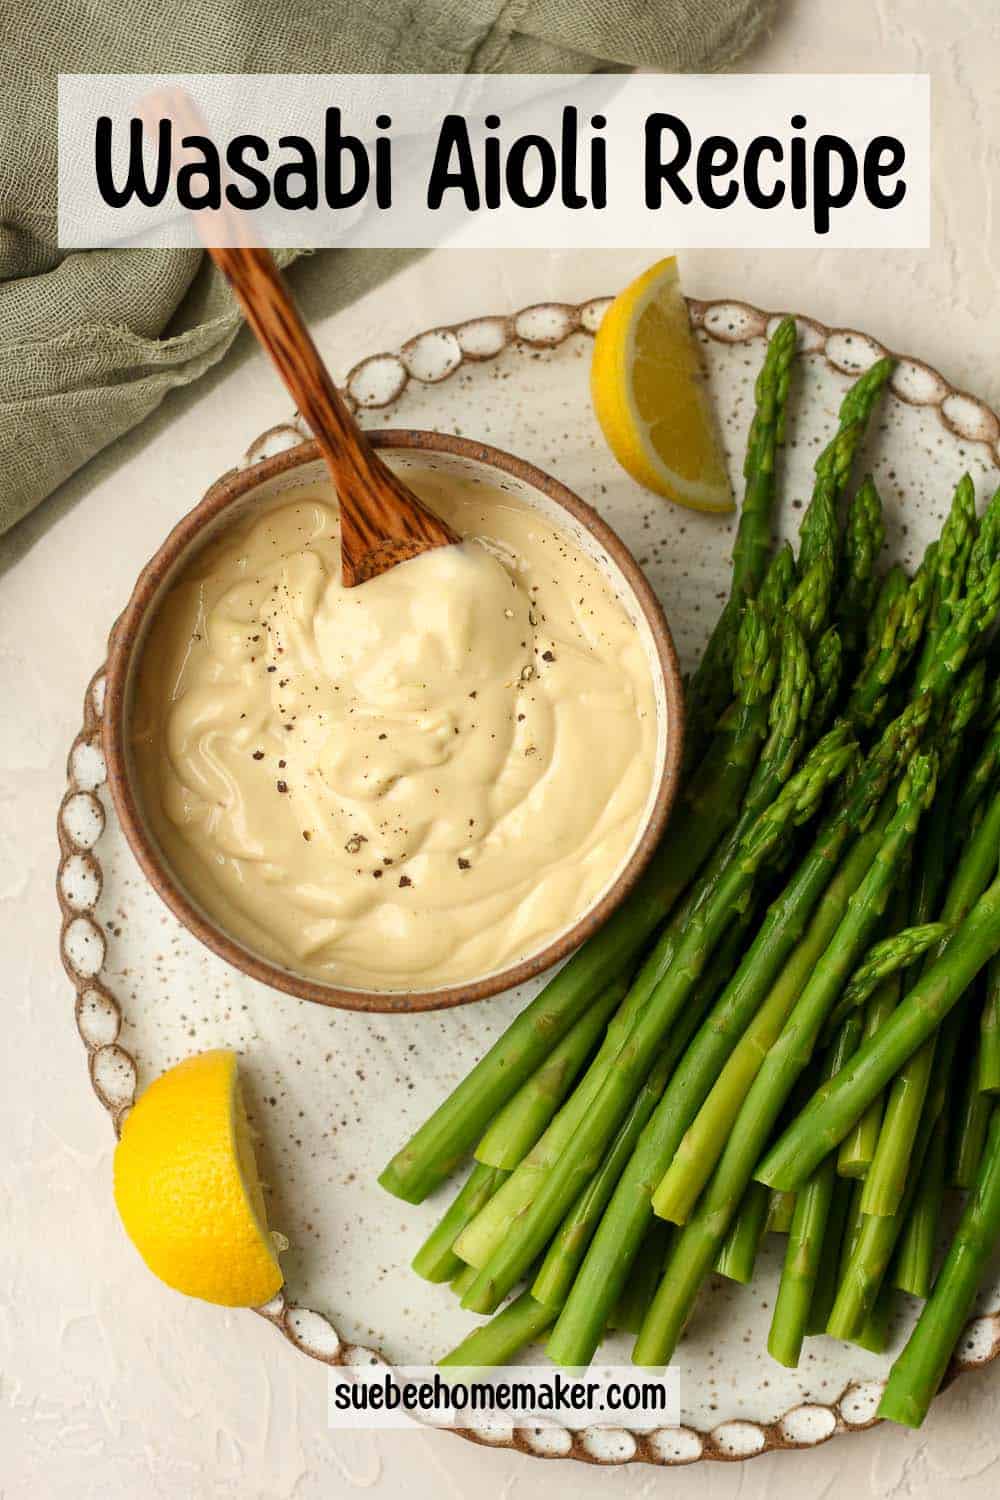 A plate of fresh asparagus and a bowl of wasabi aioli.